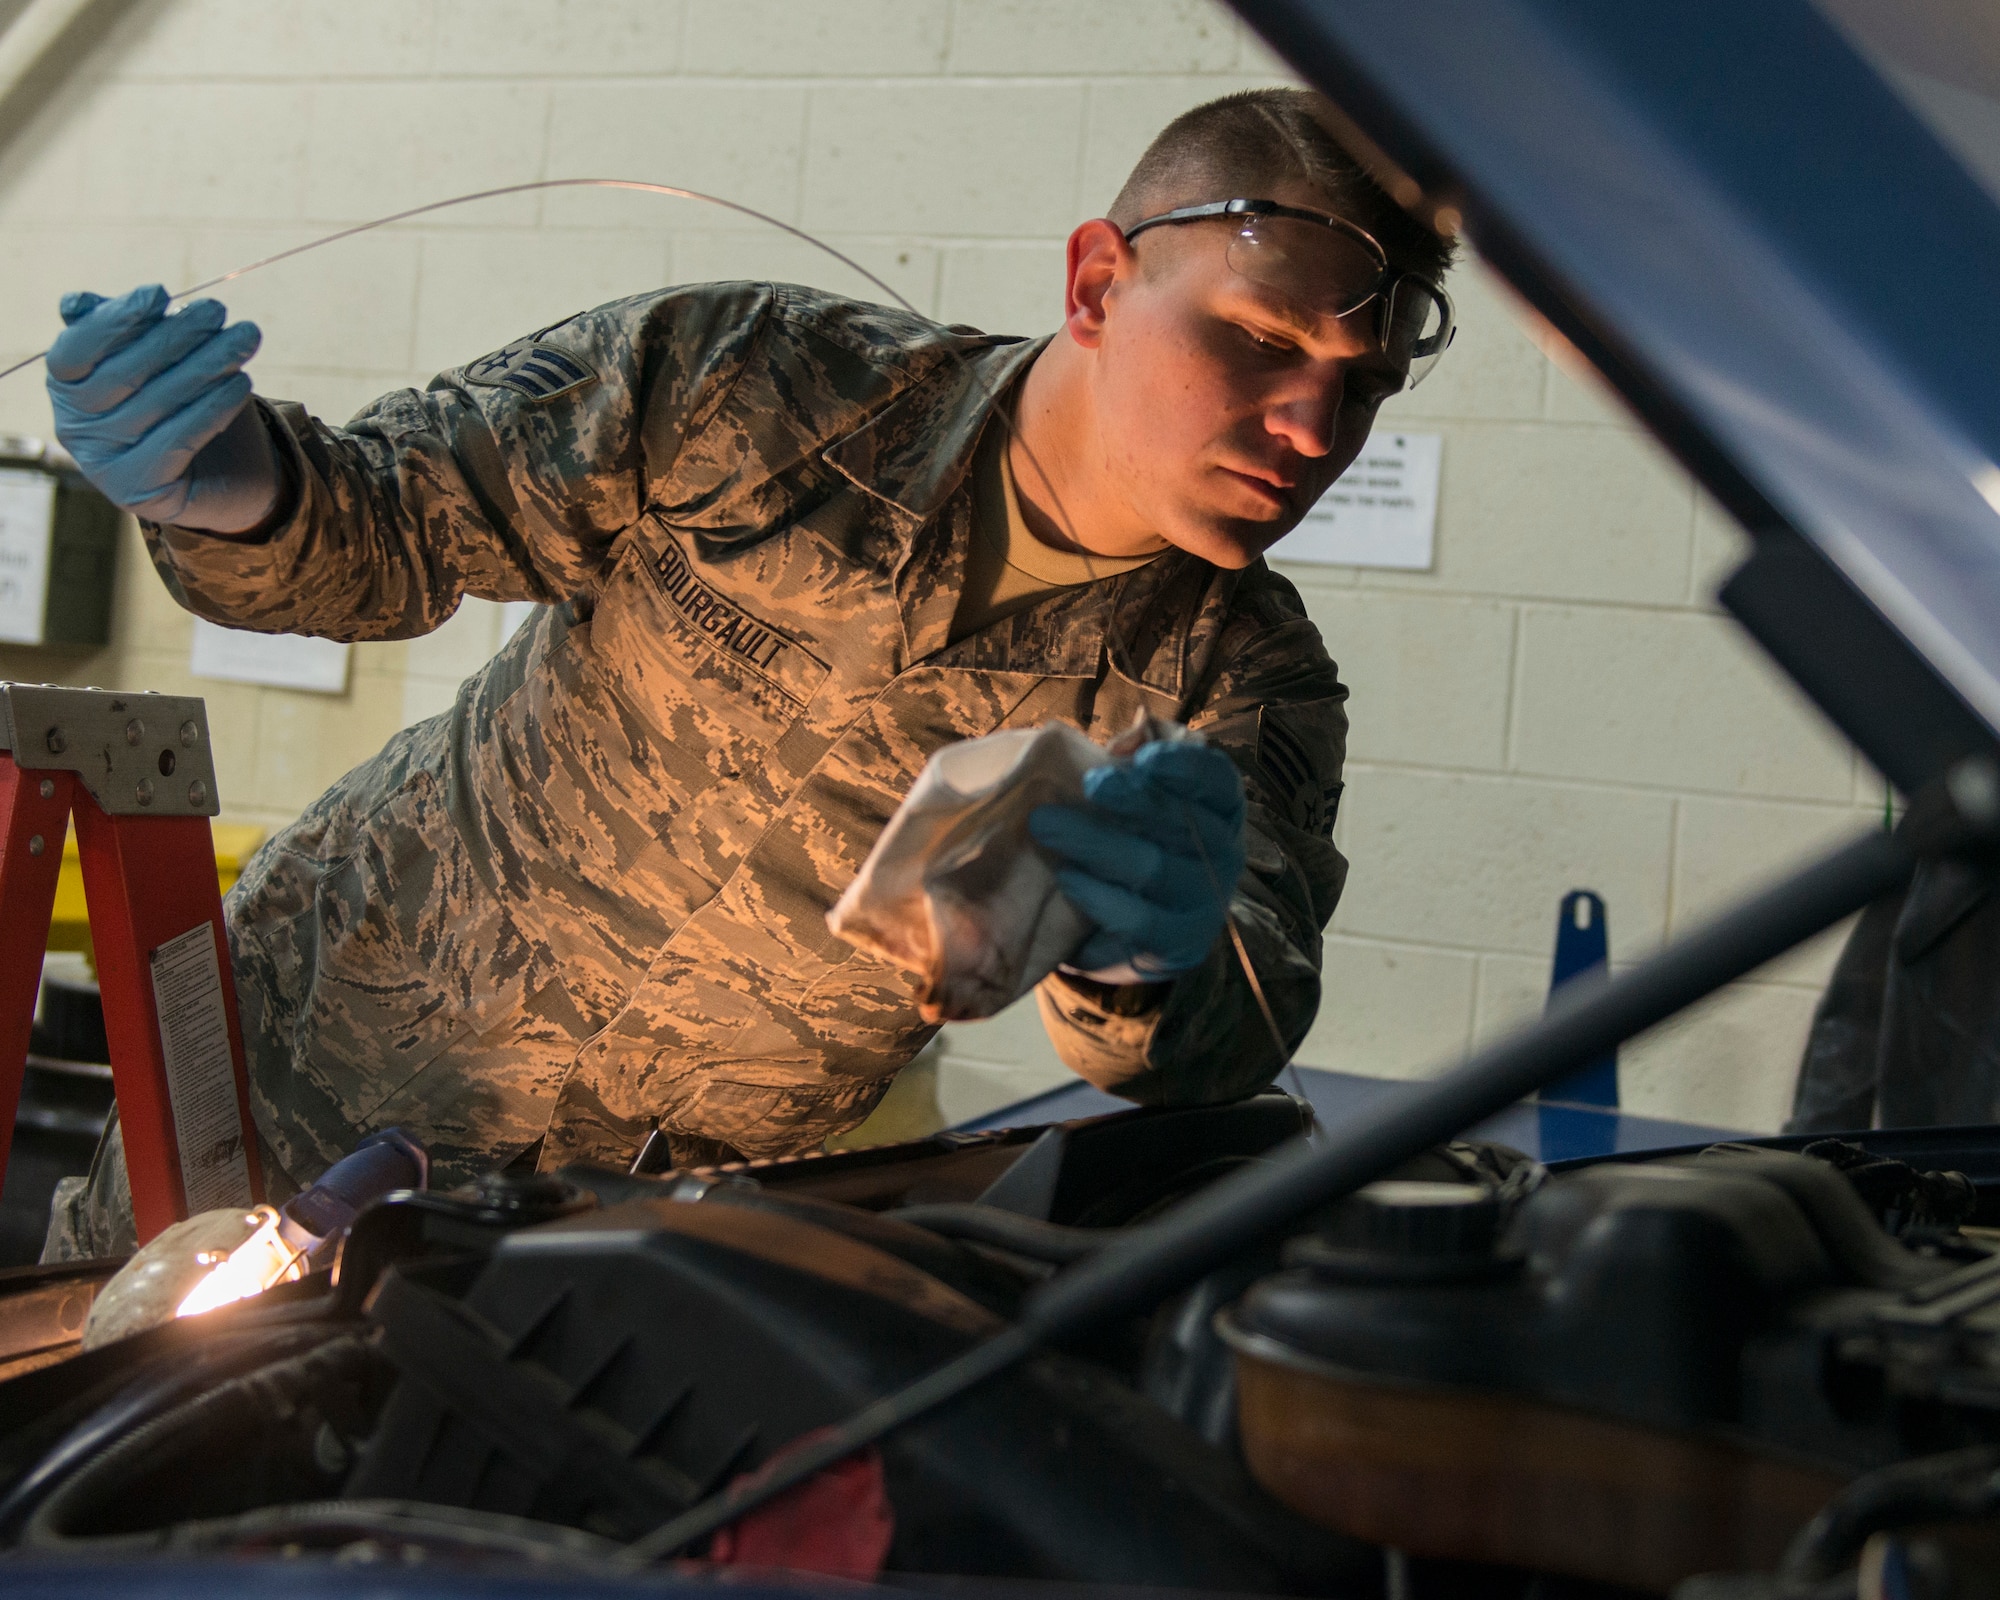 Senior Airman Thomas Bourgault, 103rd Logistics Readiness Squadron vehicle maintenance journeyman, checks the oil on a pickup truck at Bradley Air National Guard Base, East Granby, Conn. Feb. 8, 2020. Vehicle maintenance specialists perform scheduled maintenance and necessary repairs to Bradley’s entire fleet of vehicles, ensuring readiness of organizations throughout the installation, including aircraft maintenance and fire and emergency services. (U.S. Air National Guard photo by Staff Sgt. Steven Tucker)